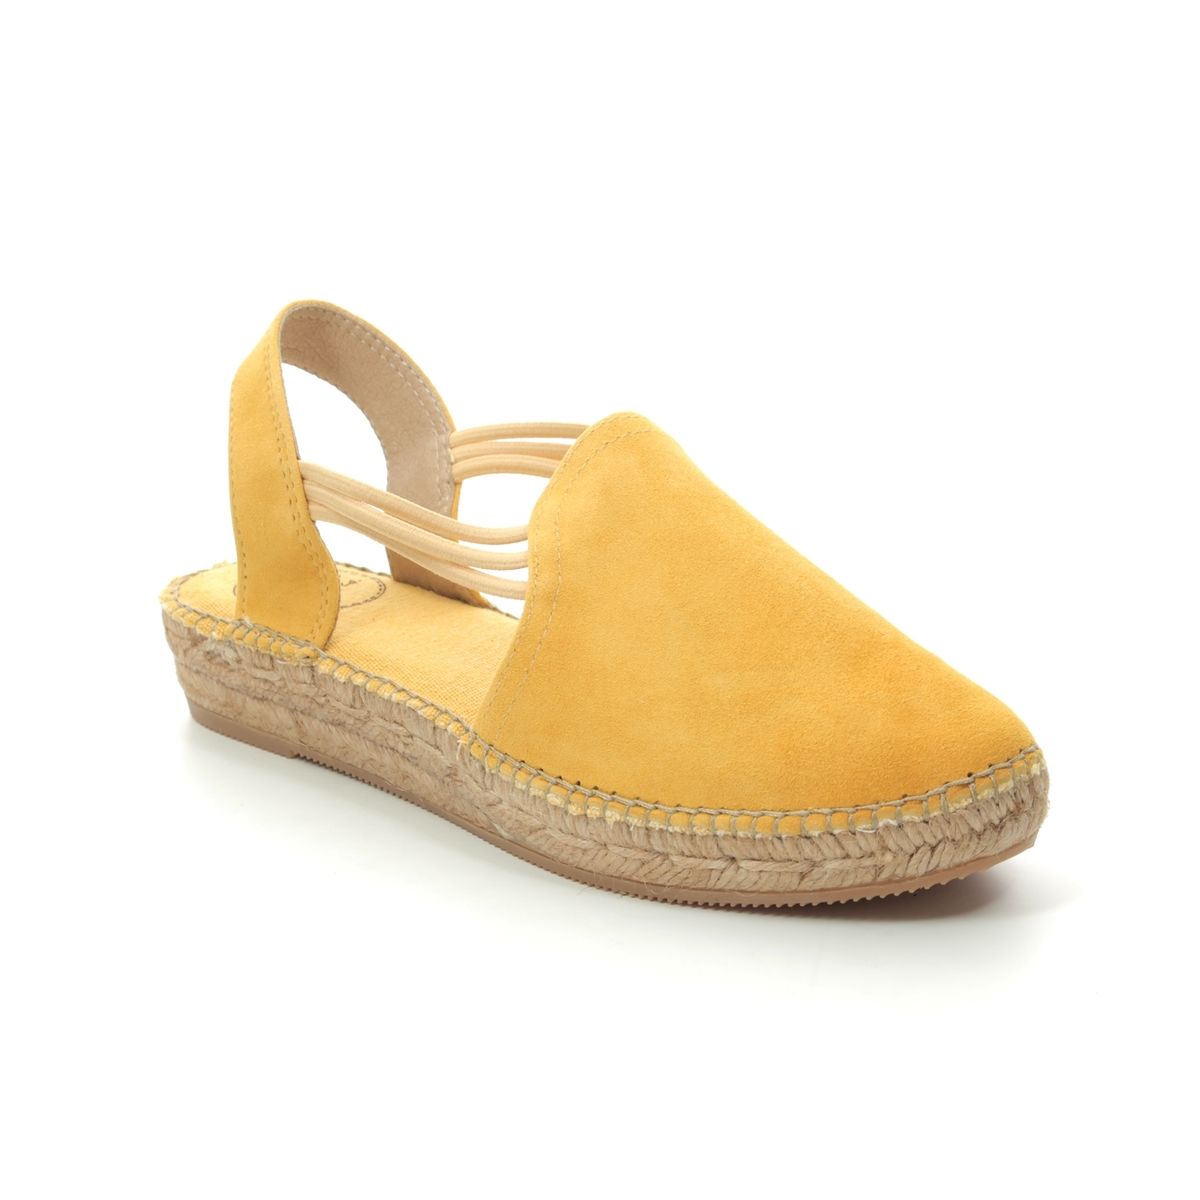 Toni Pons Nuria In Yellow Suede 0110-08 In Size 40 In Plain Yellow Suede